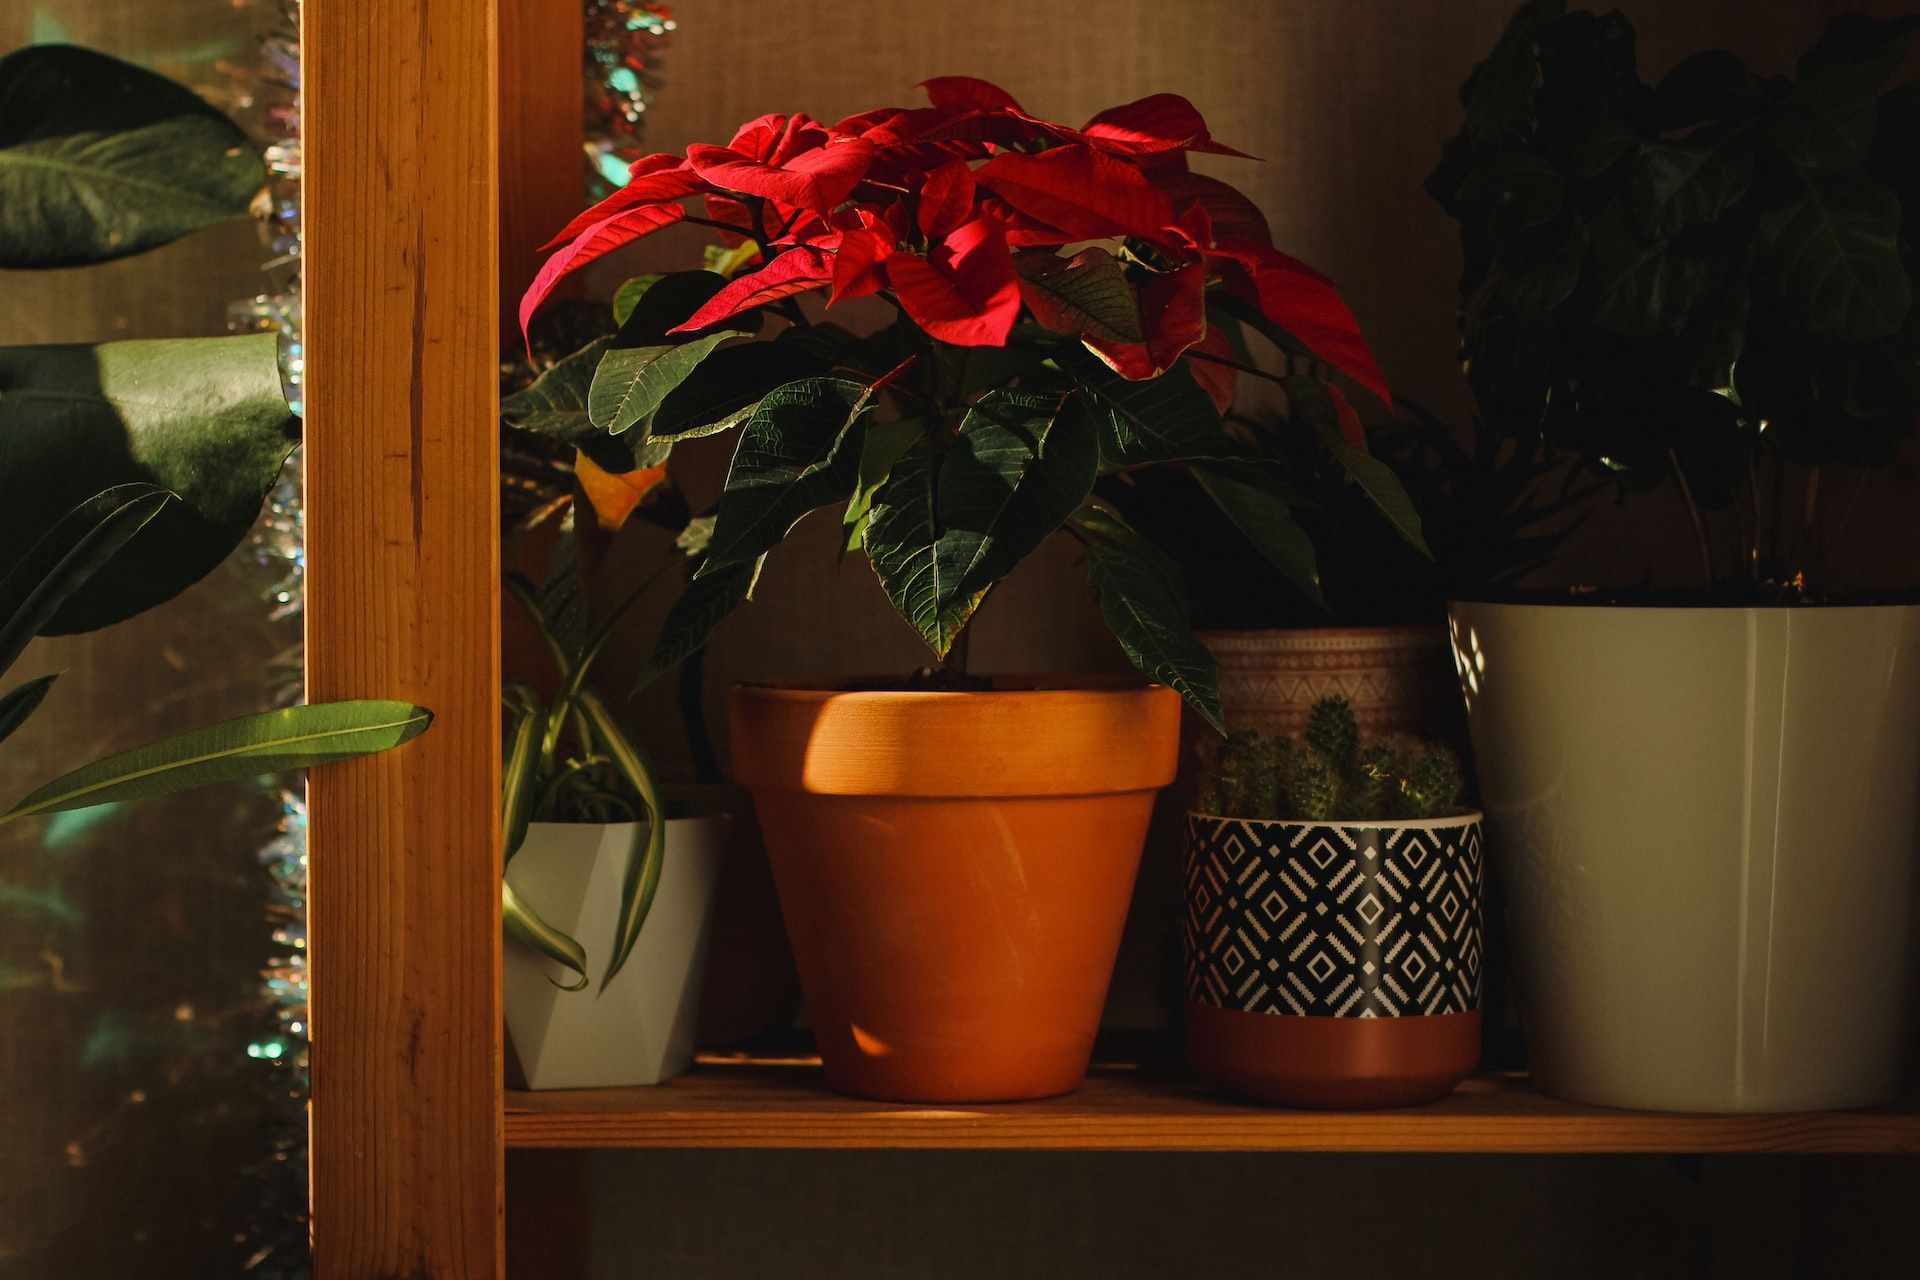 Poinsettia on a shelf with other plants